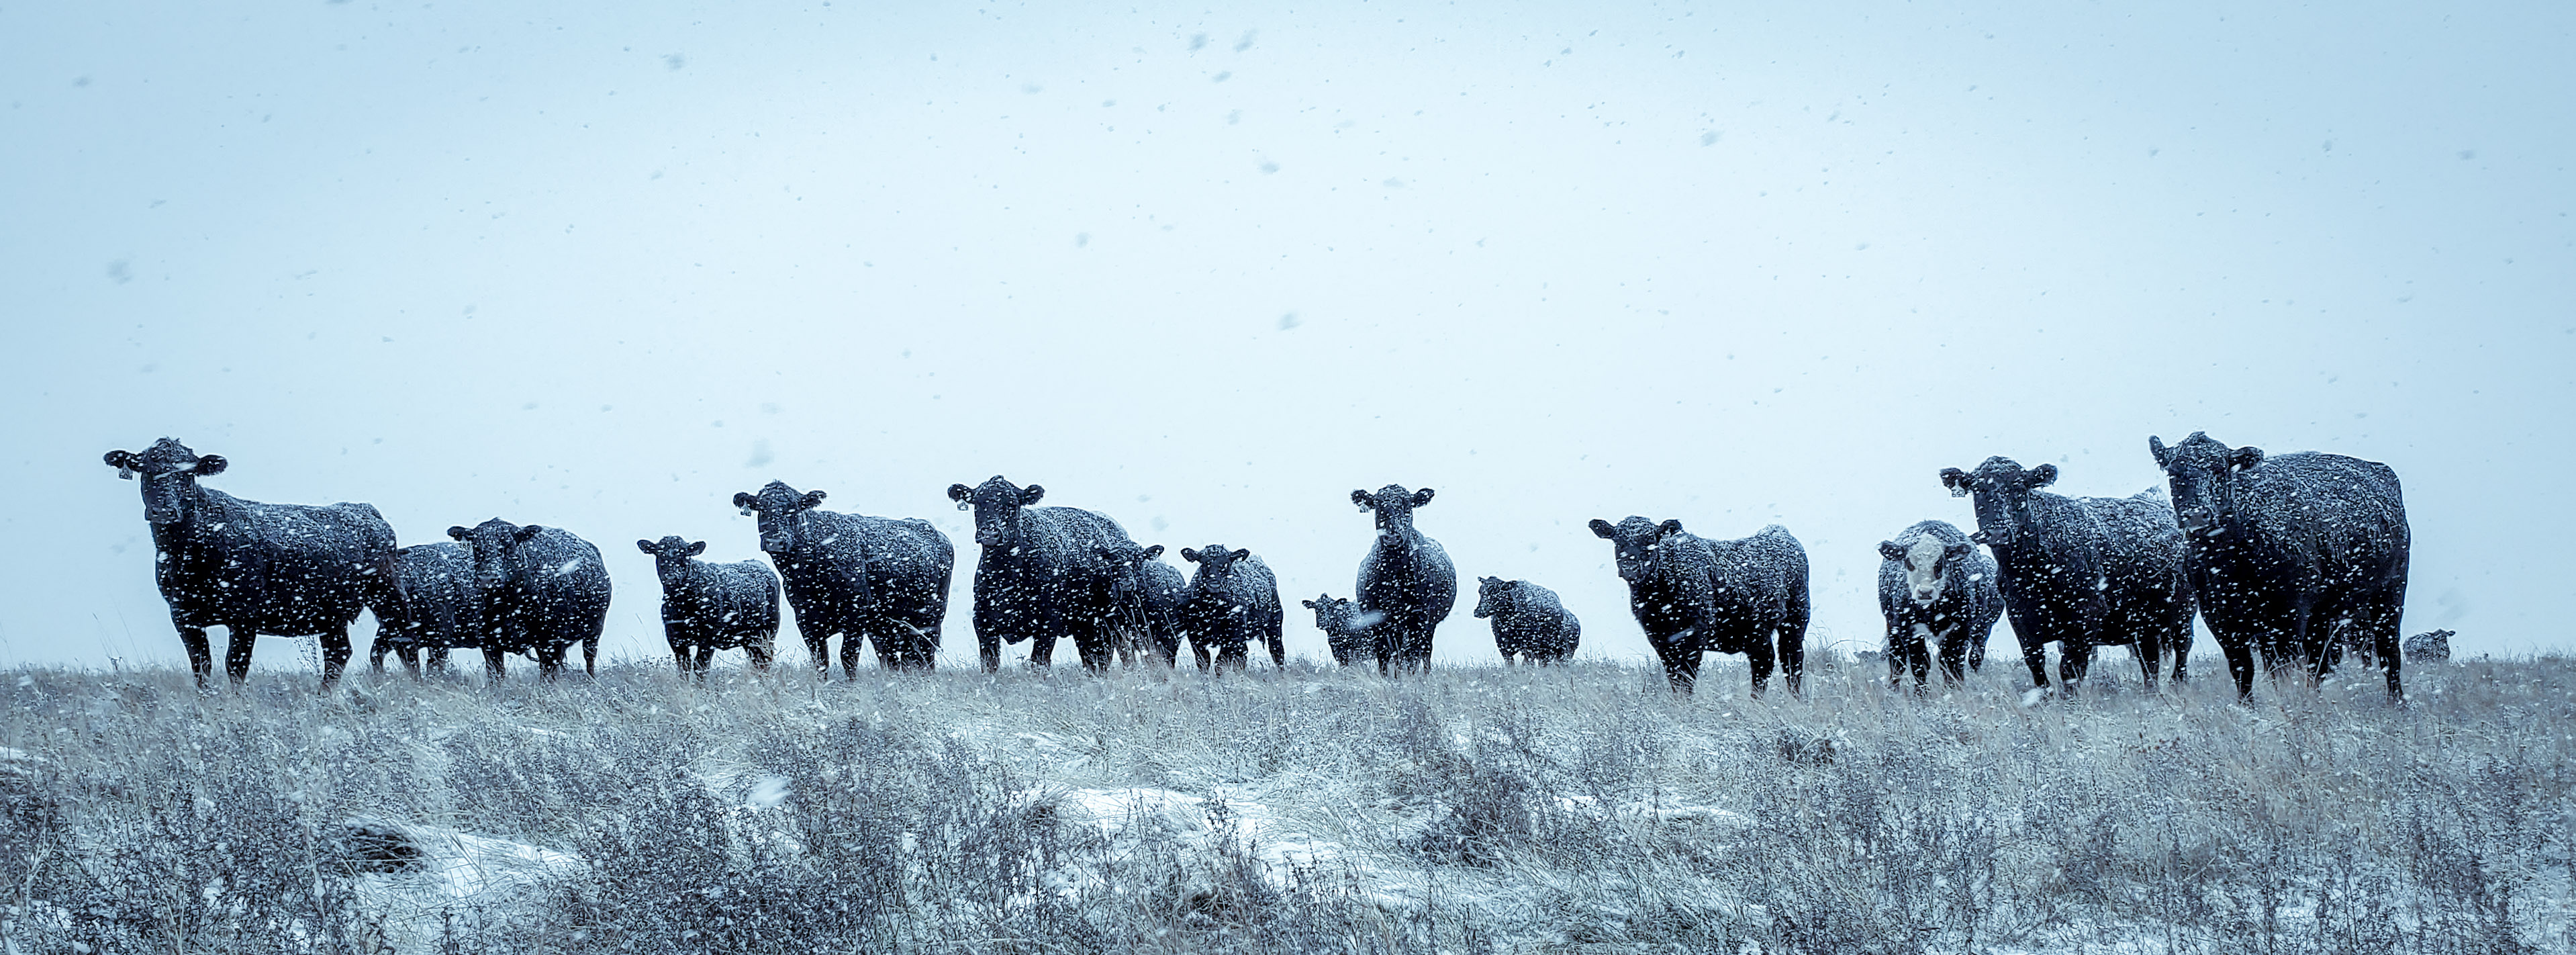 Cattle in the snow